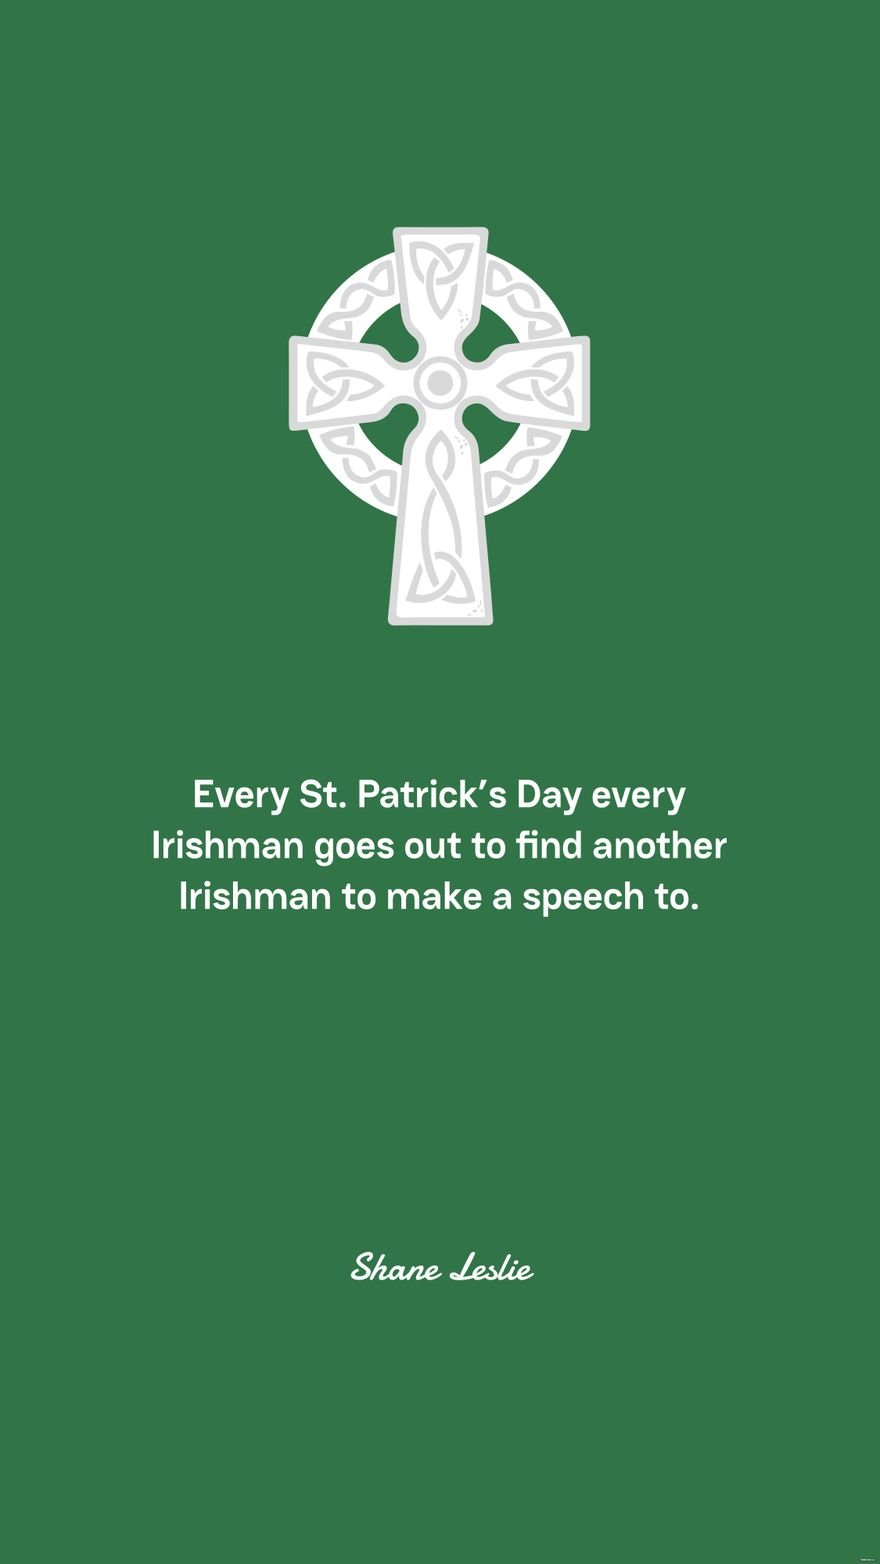 Free Shane Leslie - Every St. Patrick’s Day every Irishman goes out to find another Irishman to make a speech to. in JPEG